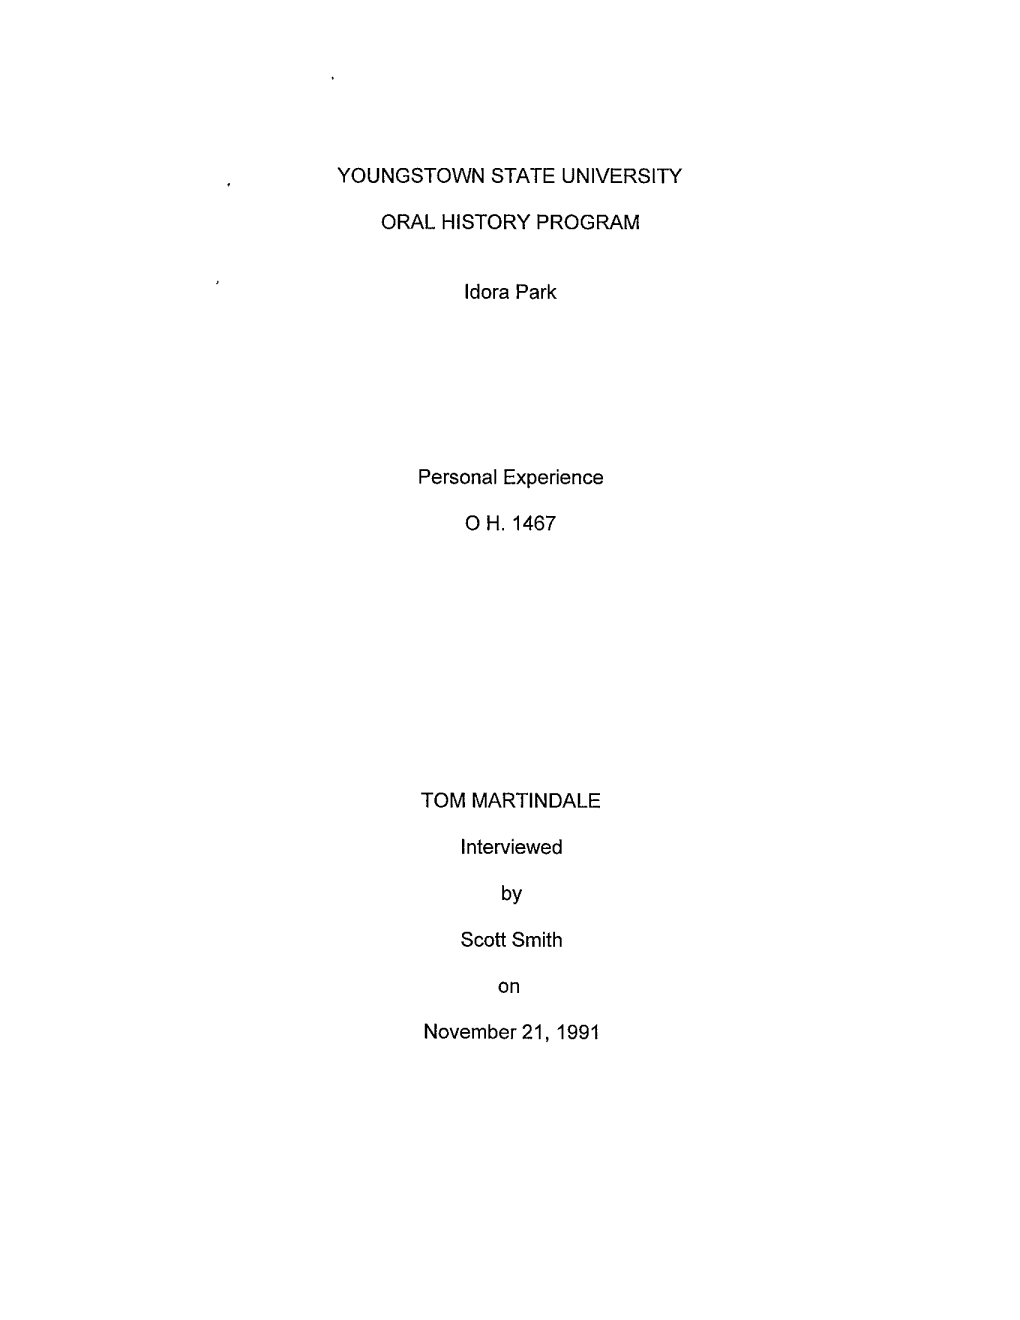 Youngstown State University Oral History Program, on Idora Park, by Scott Smith, on November 21, 1991, at His Office on the Second Floor of Jones Hall, at 11.45 a M